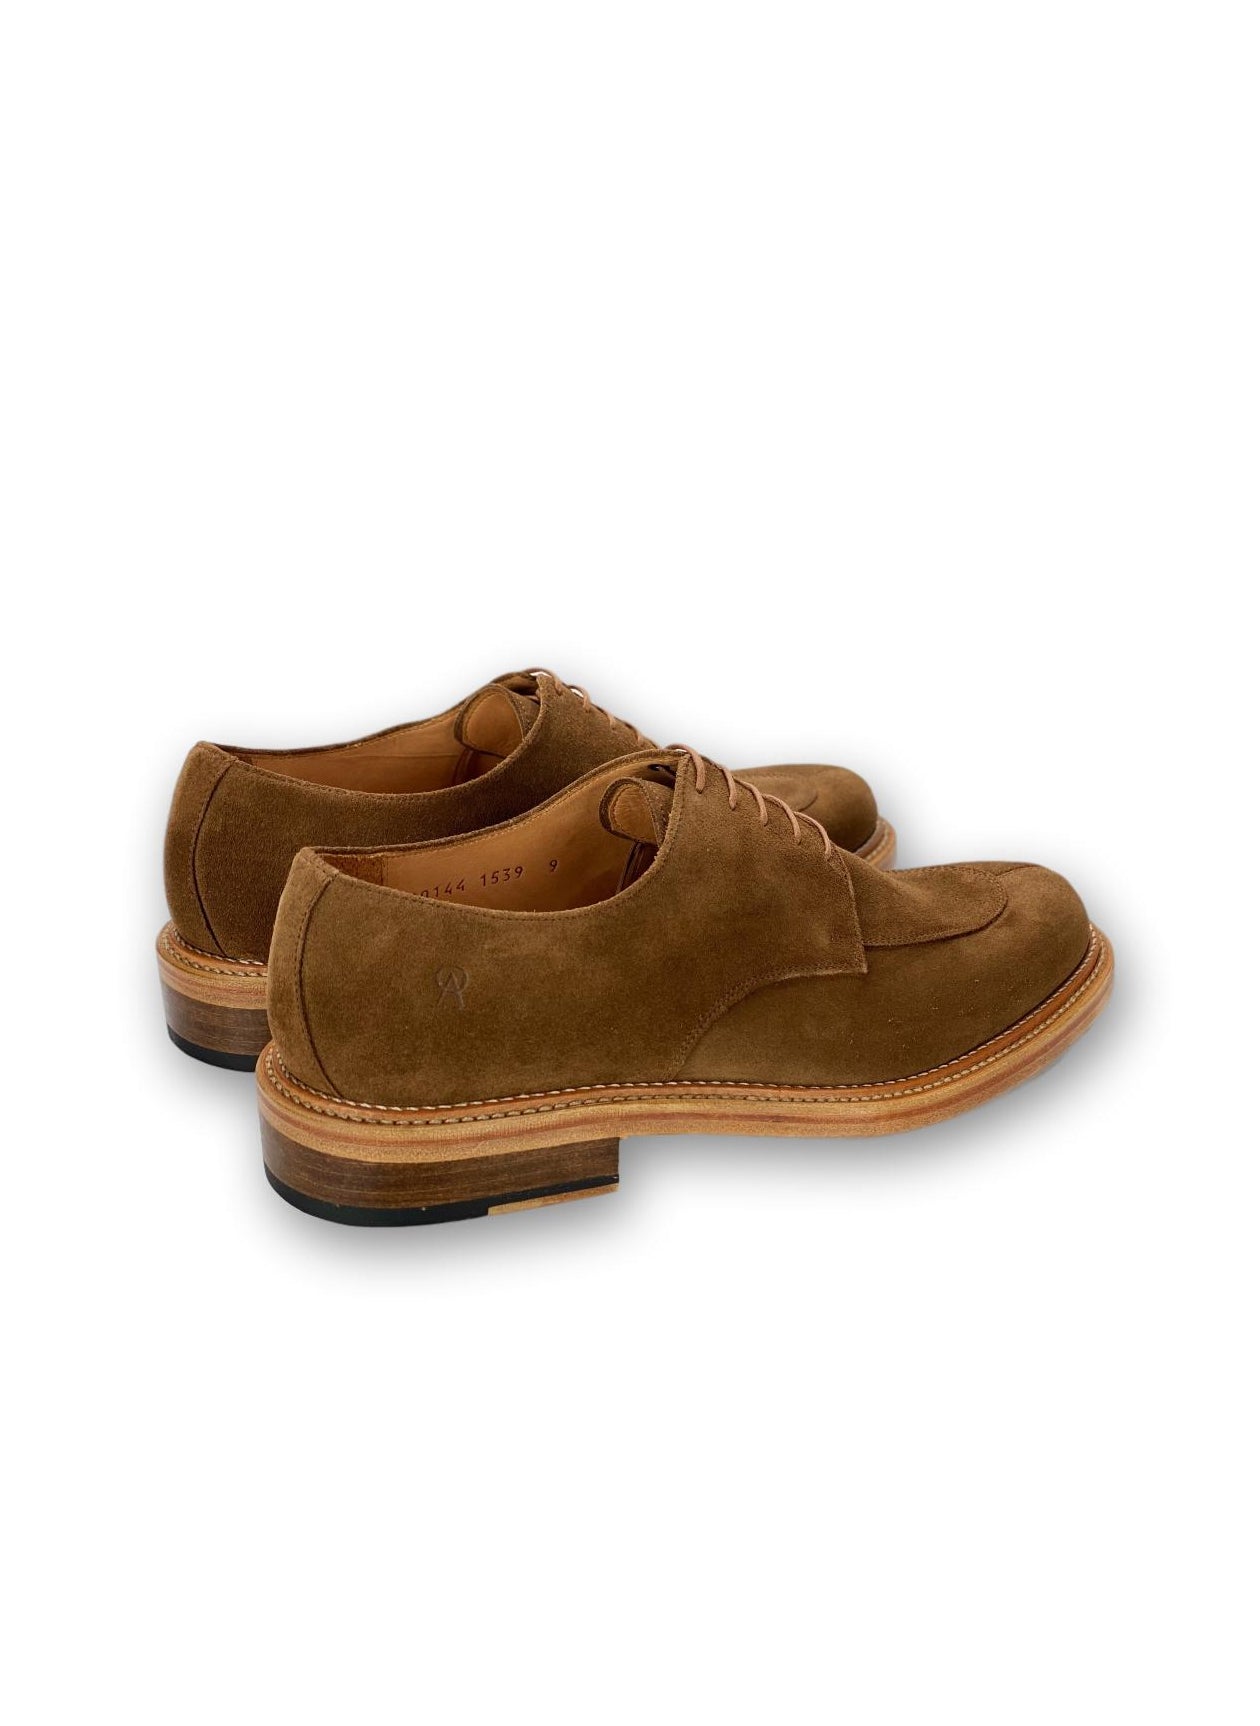 ARMIN OEHLER KNOXVILLE SUEDE LACE UP SHOE - GINGER SUEDE